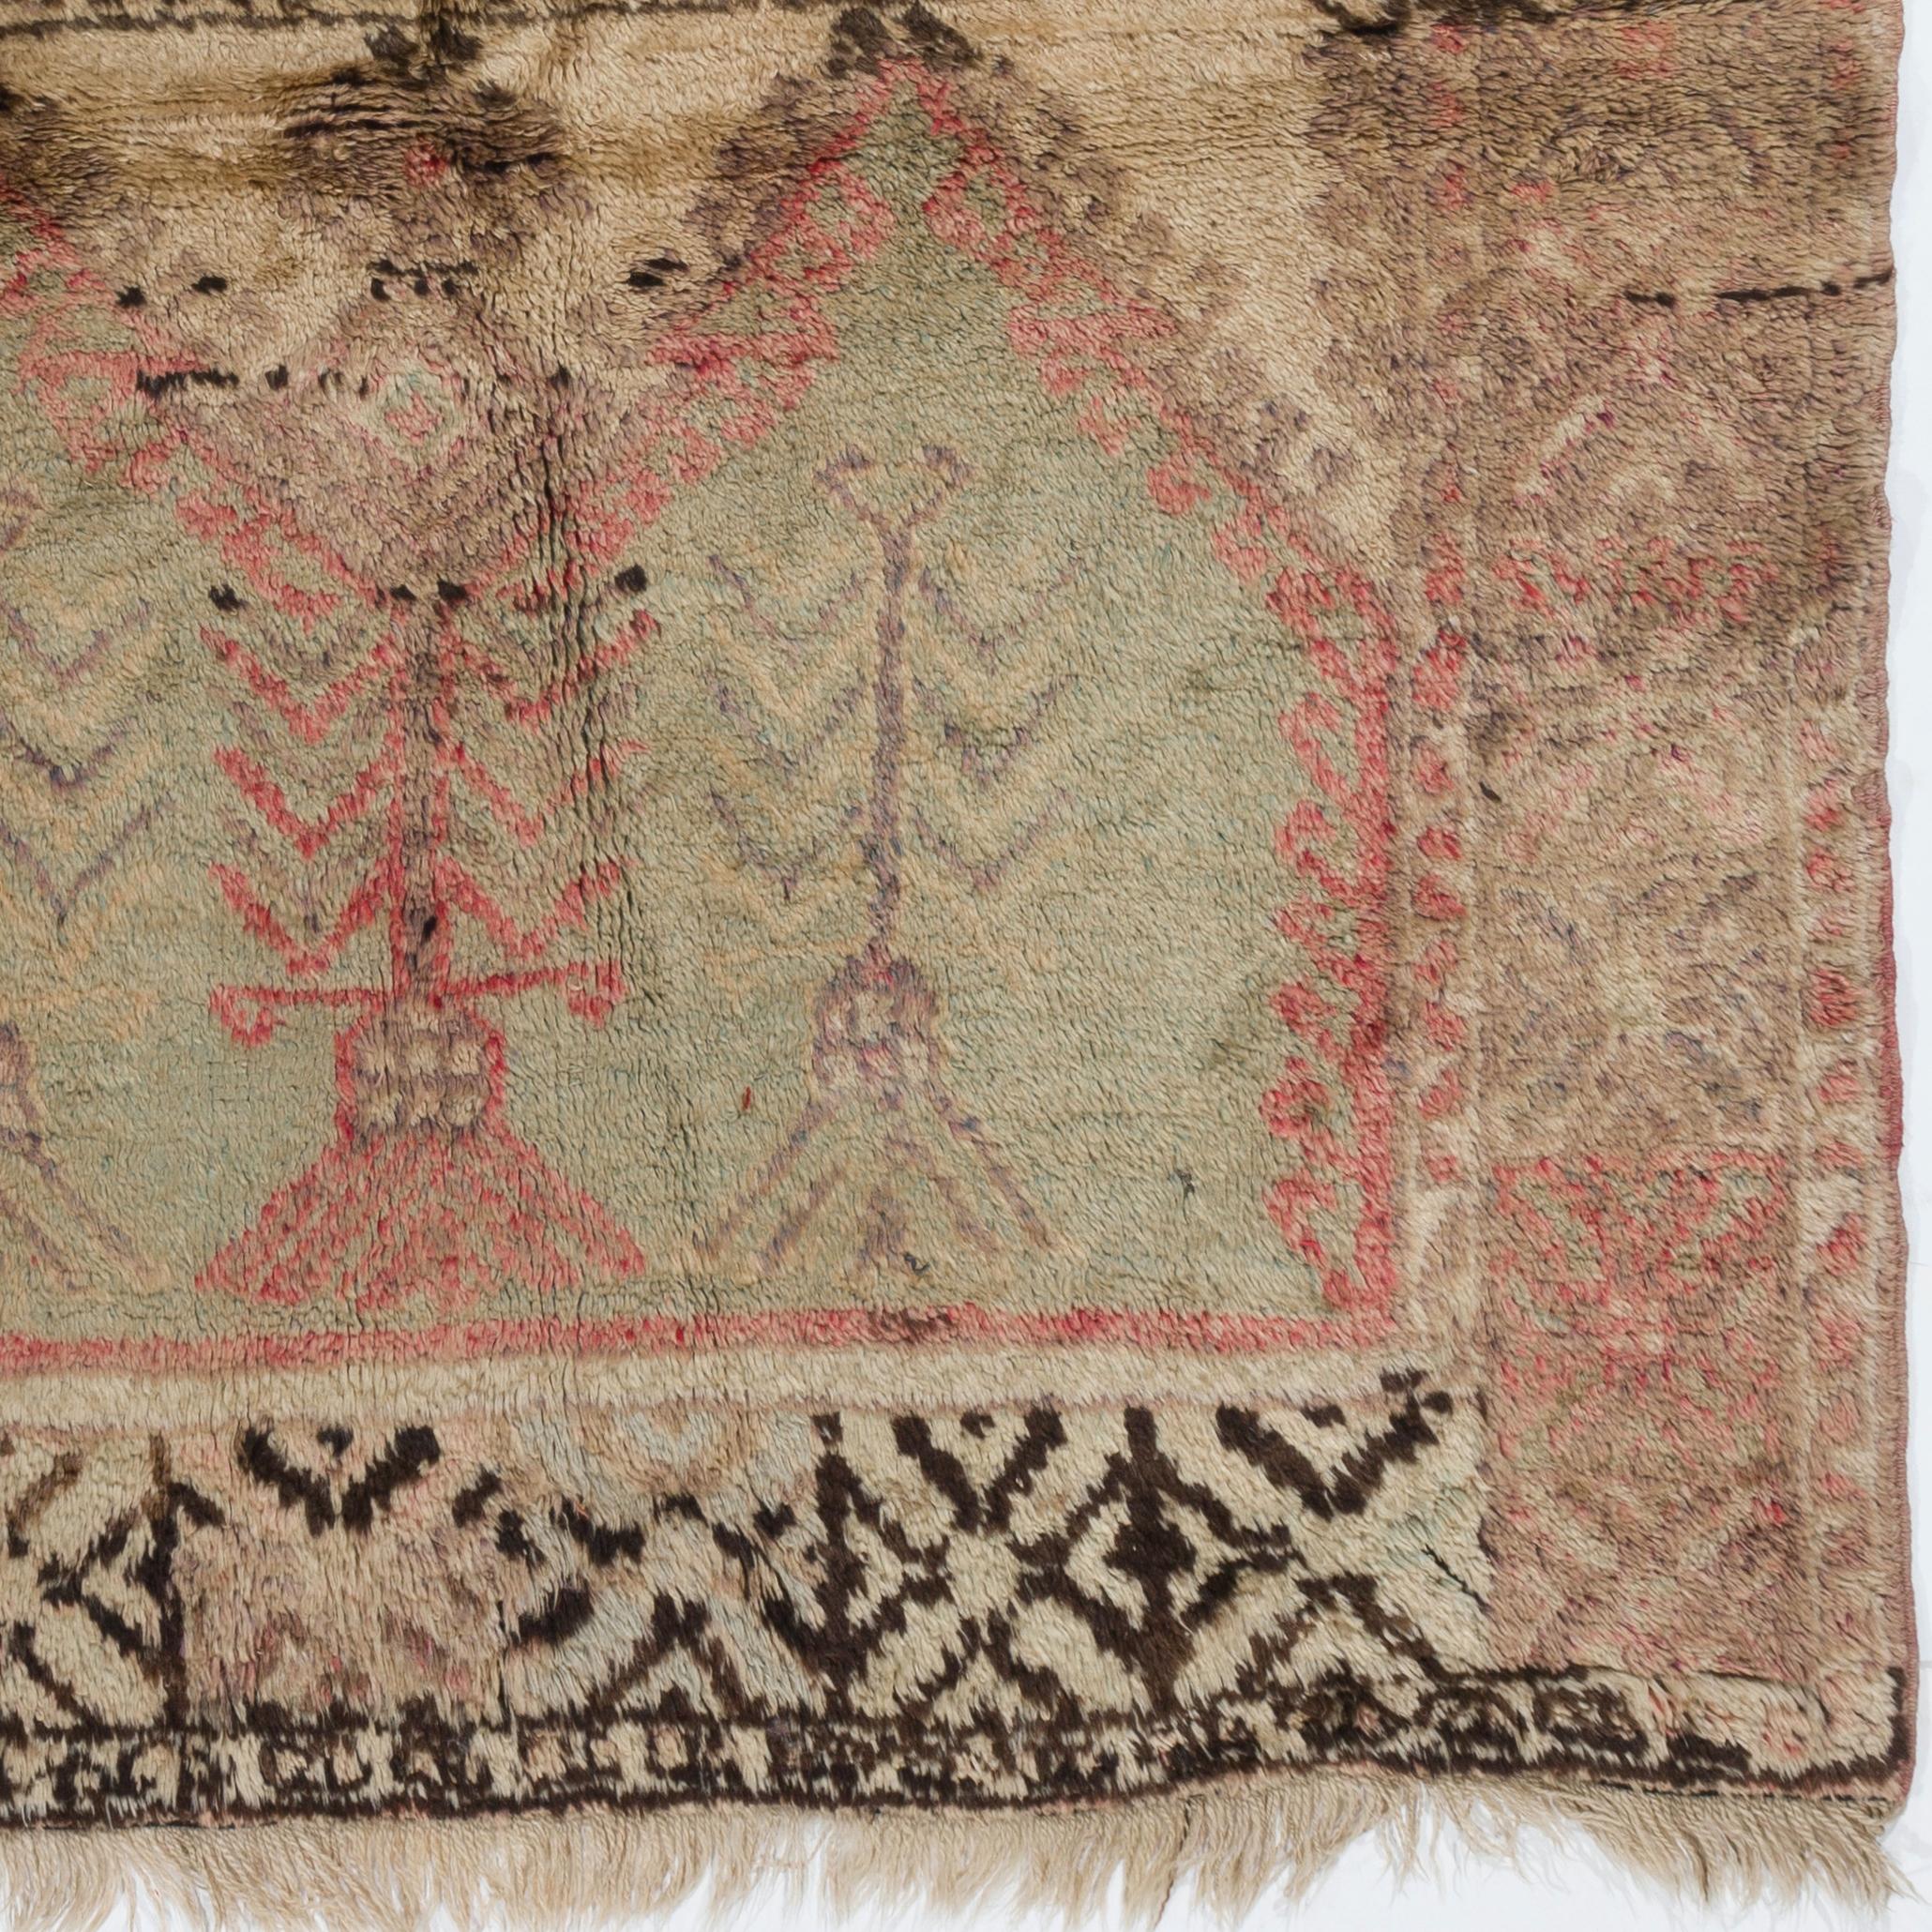 Turkish 4x6 Ft Antique Central Anatolian Village Rug in Soft Plant Dyed Colors, Ca 1910 For Sale